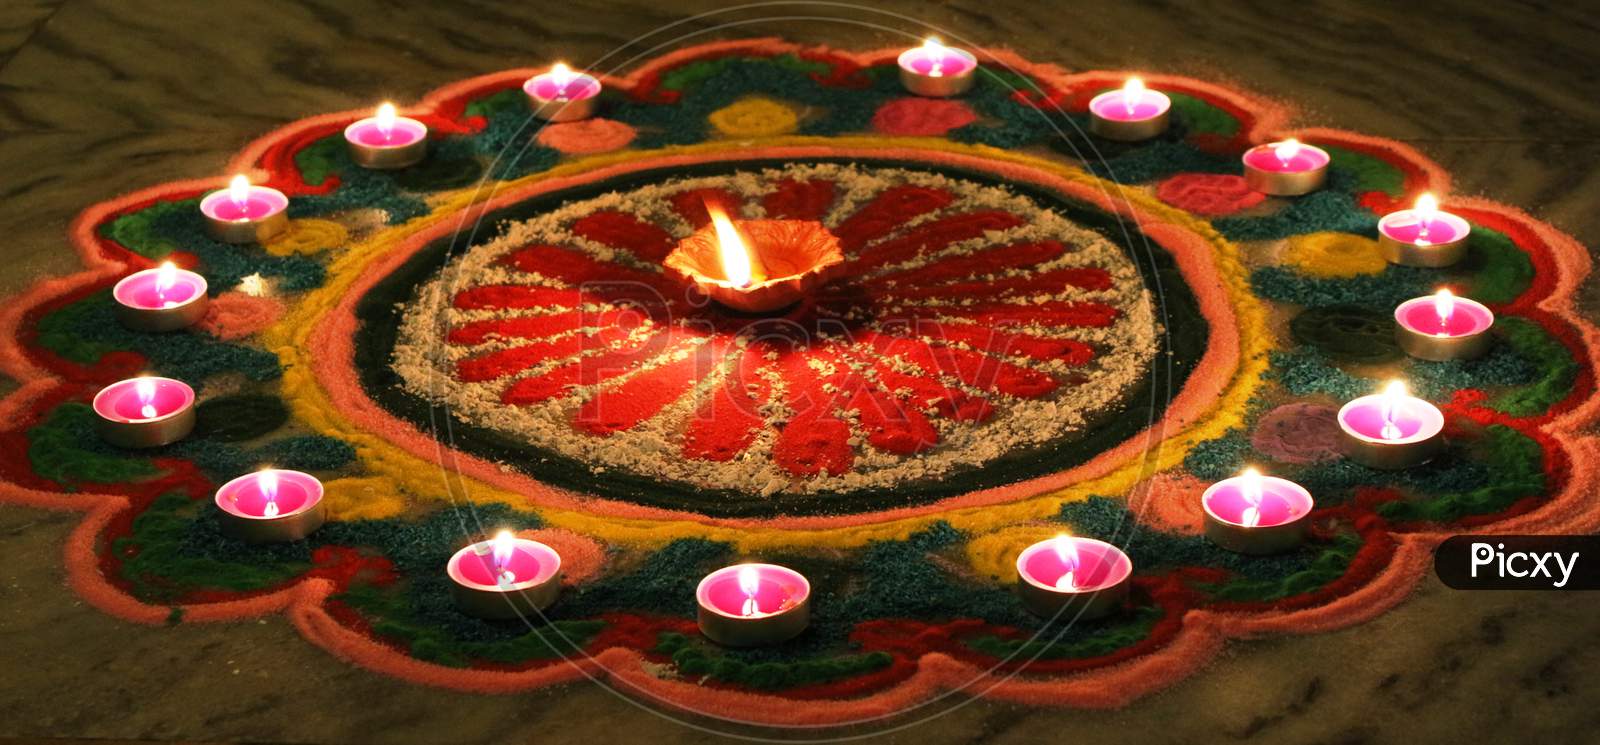 close up of a hand made Rangoli during Diwali festival